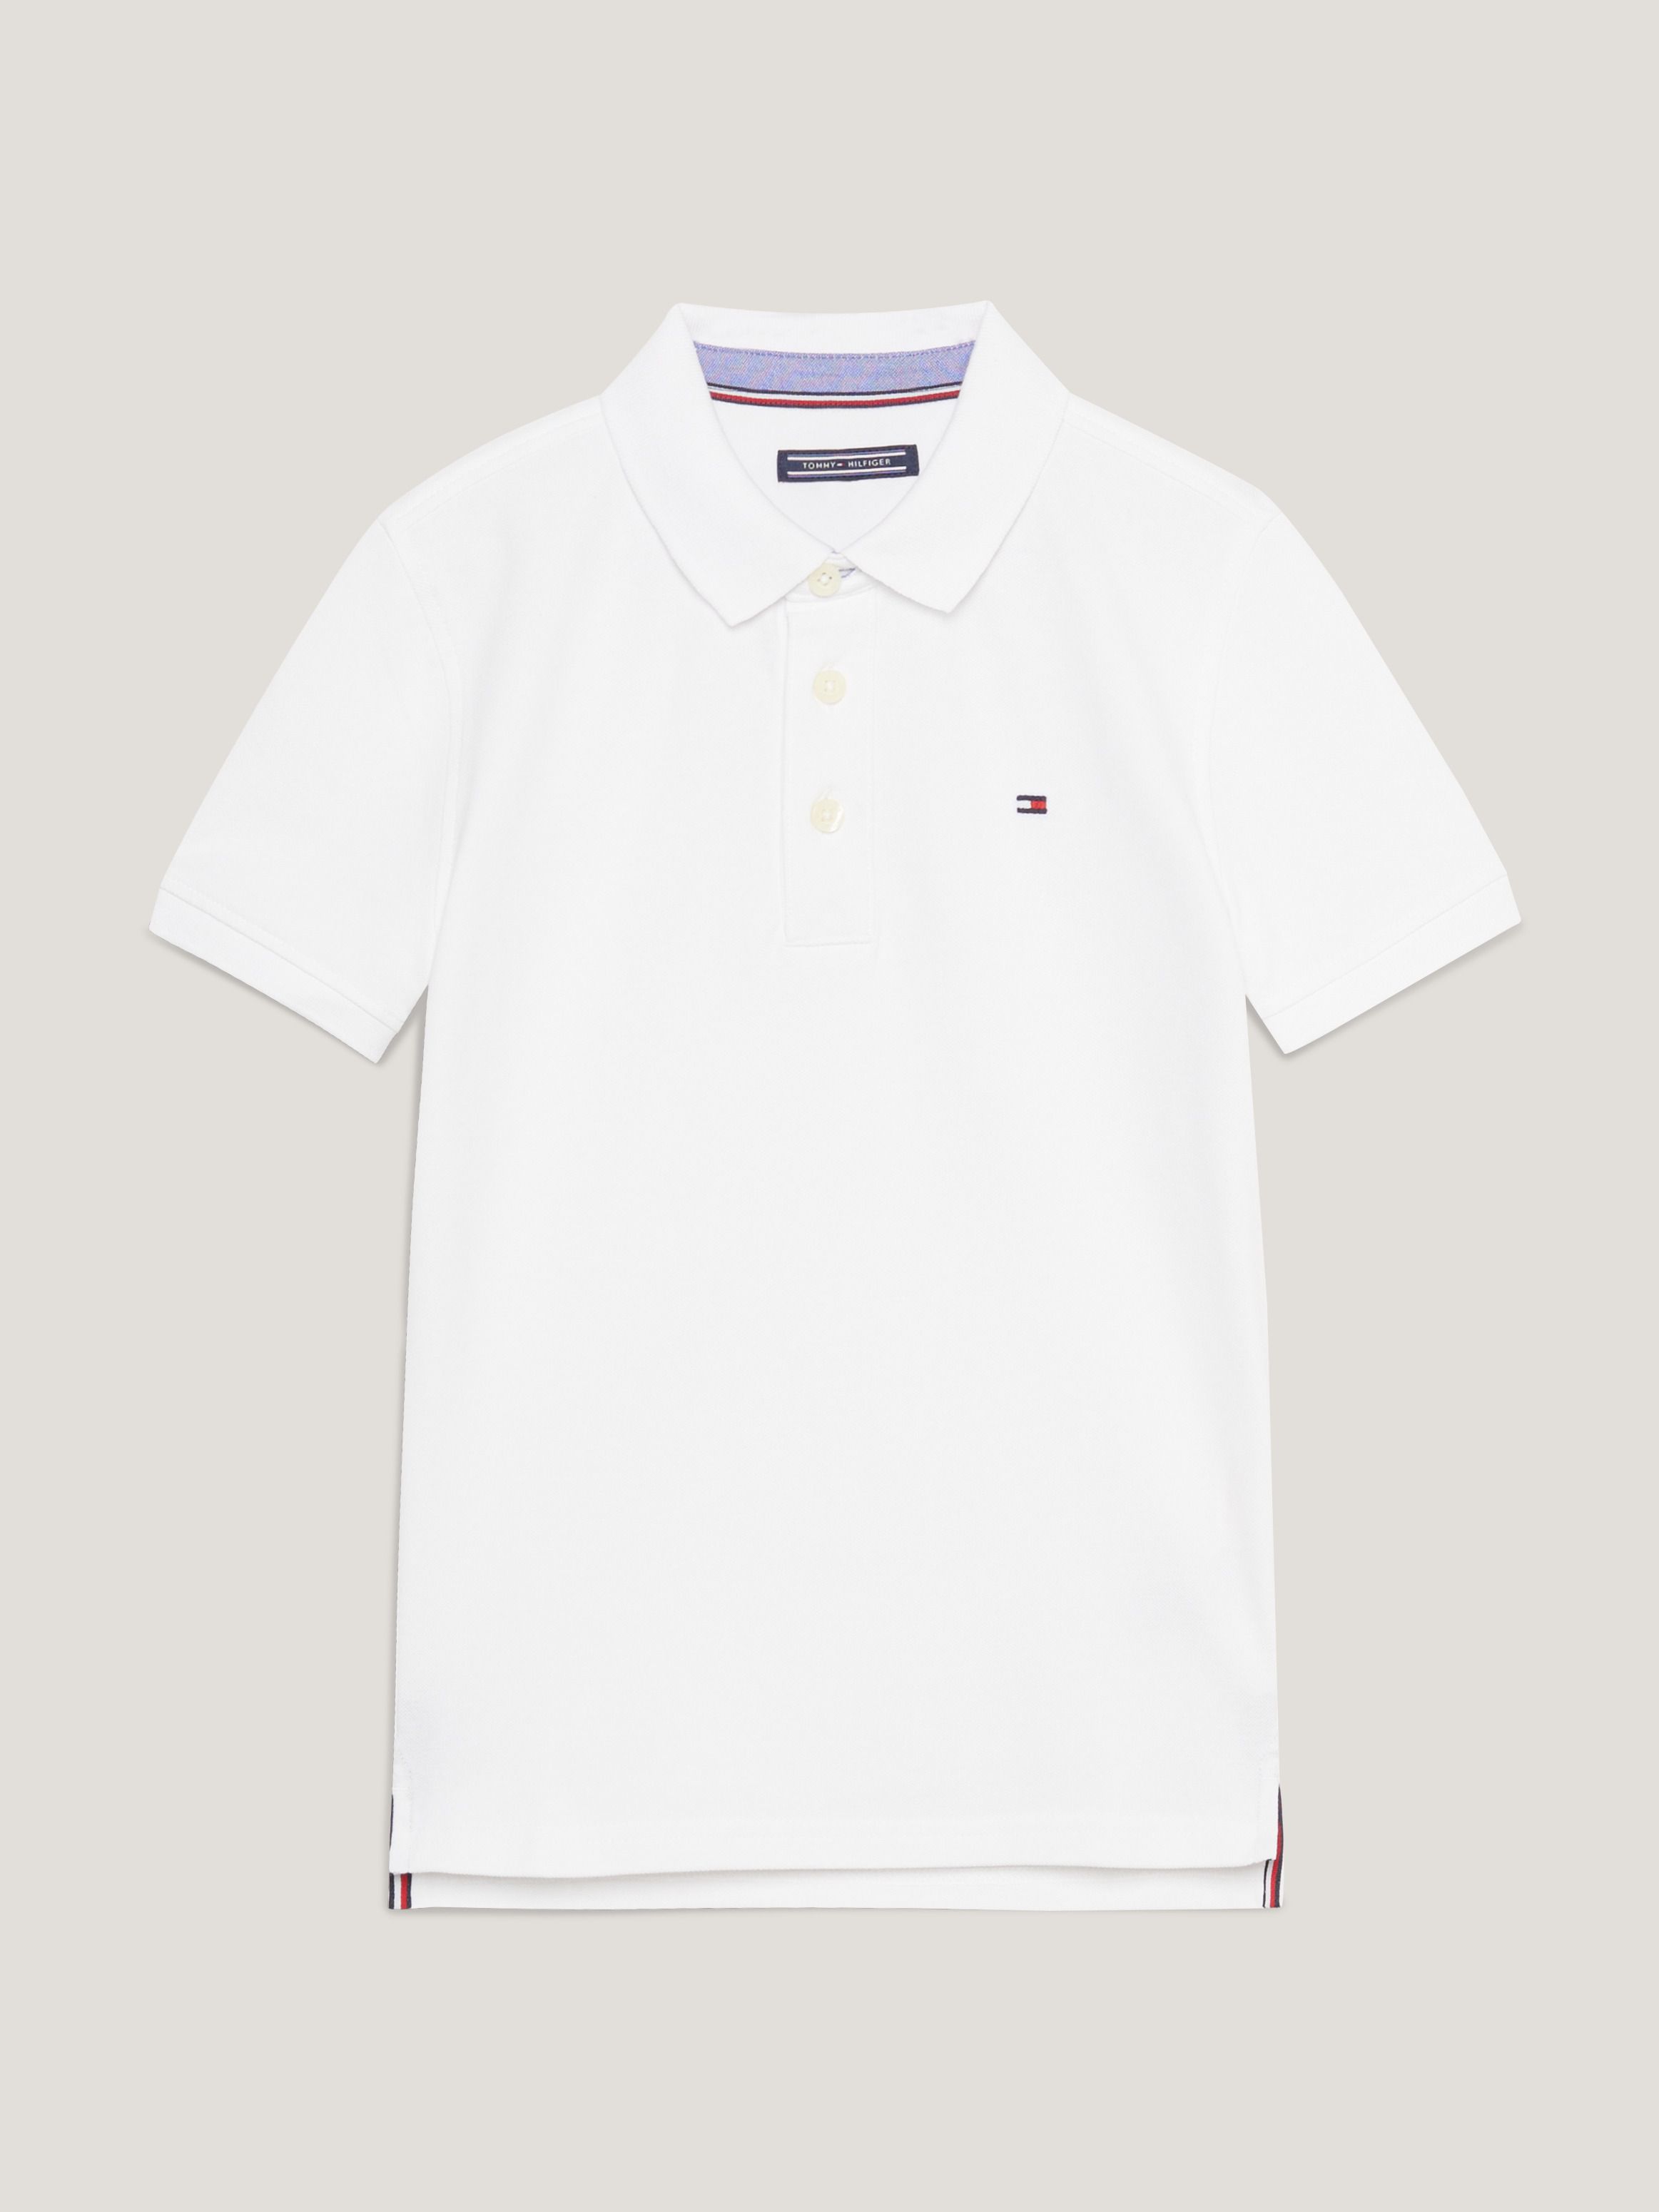 Classic Short Sleeves Polo T-Shirt | Tommy Hilfiger